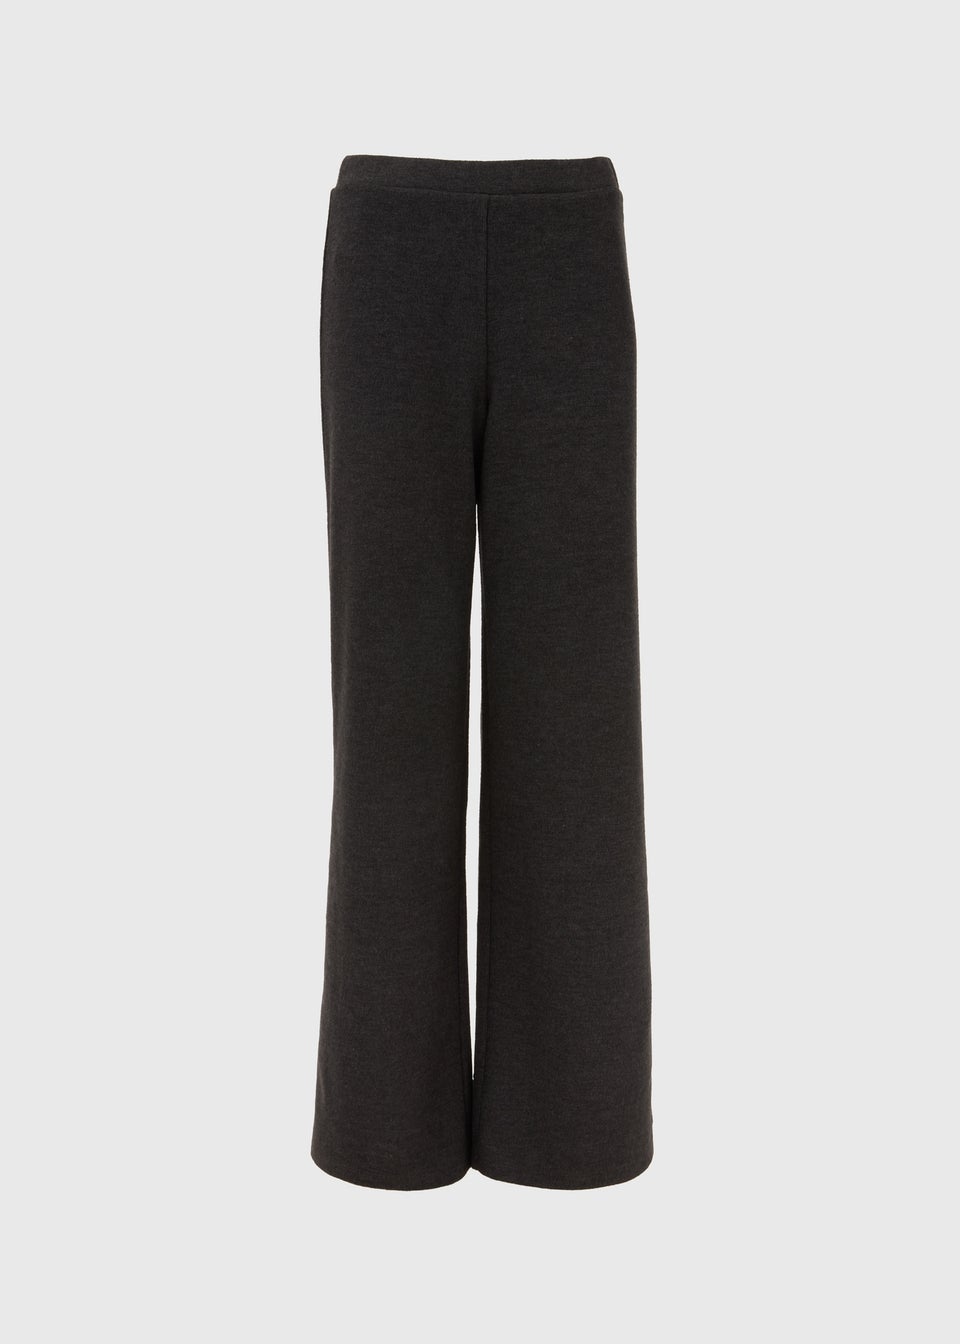 Charcoal Soft Touch Wide Leggings - Matalan